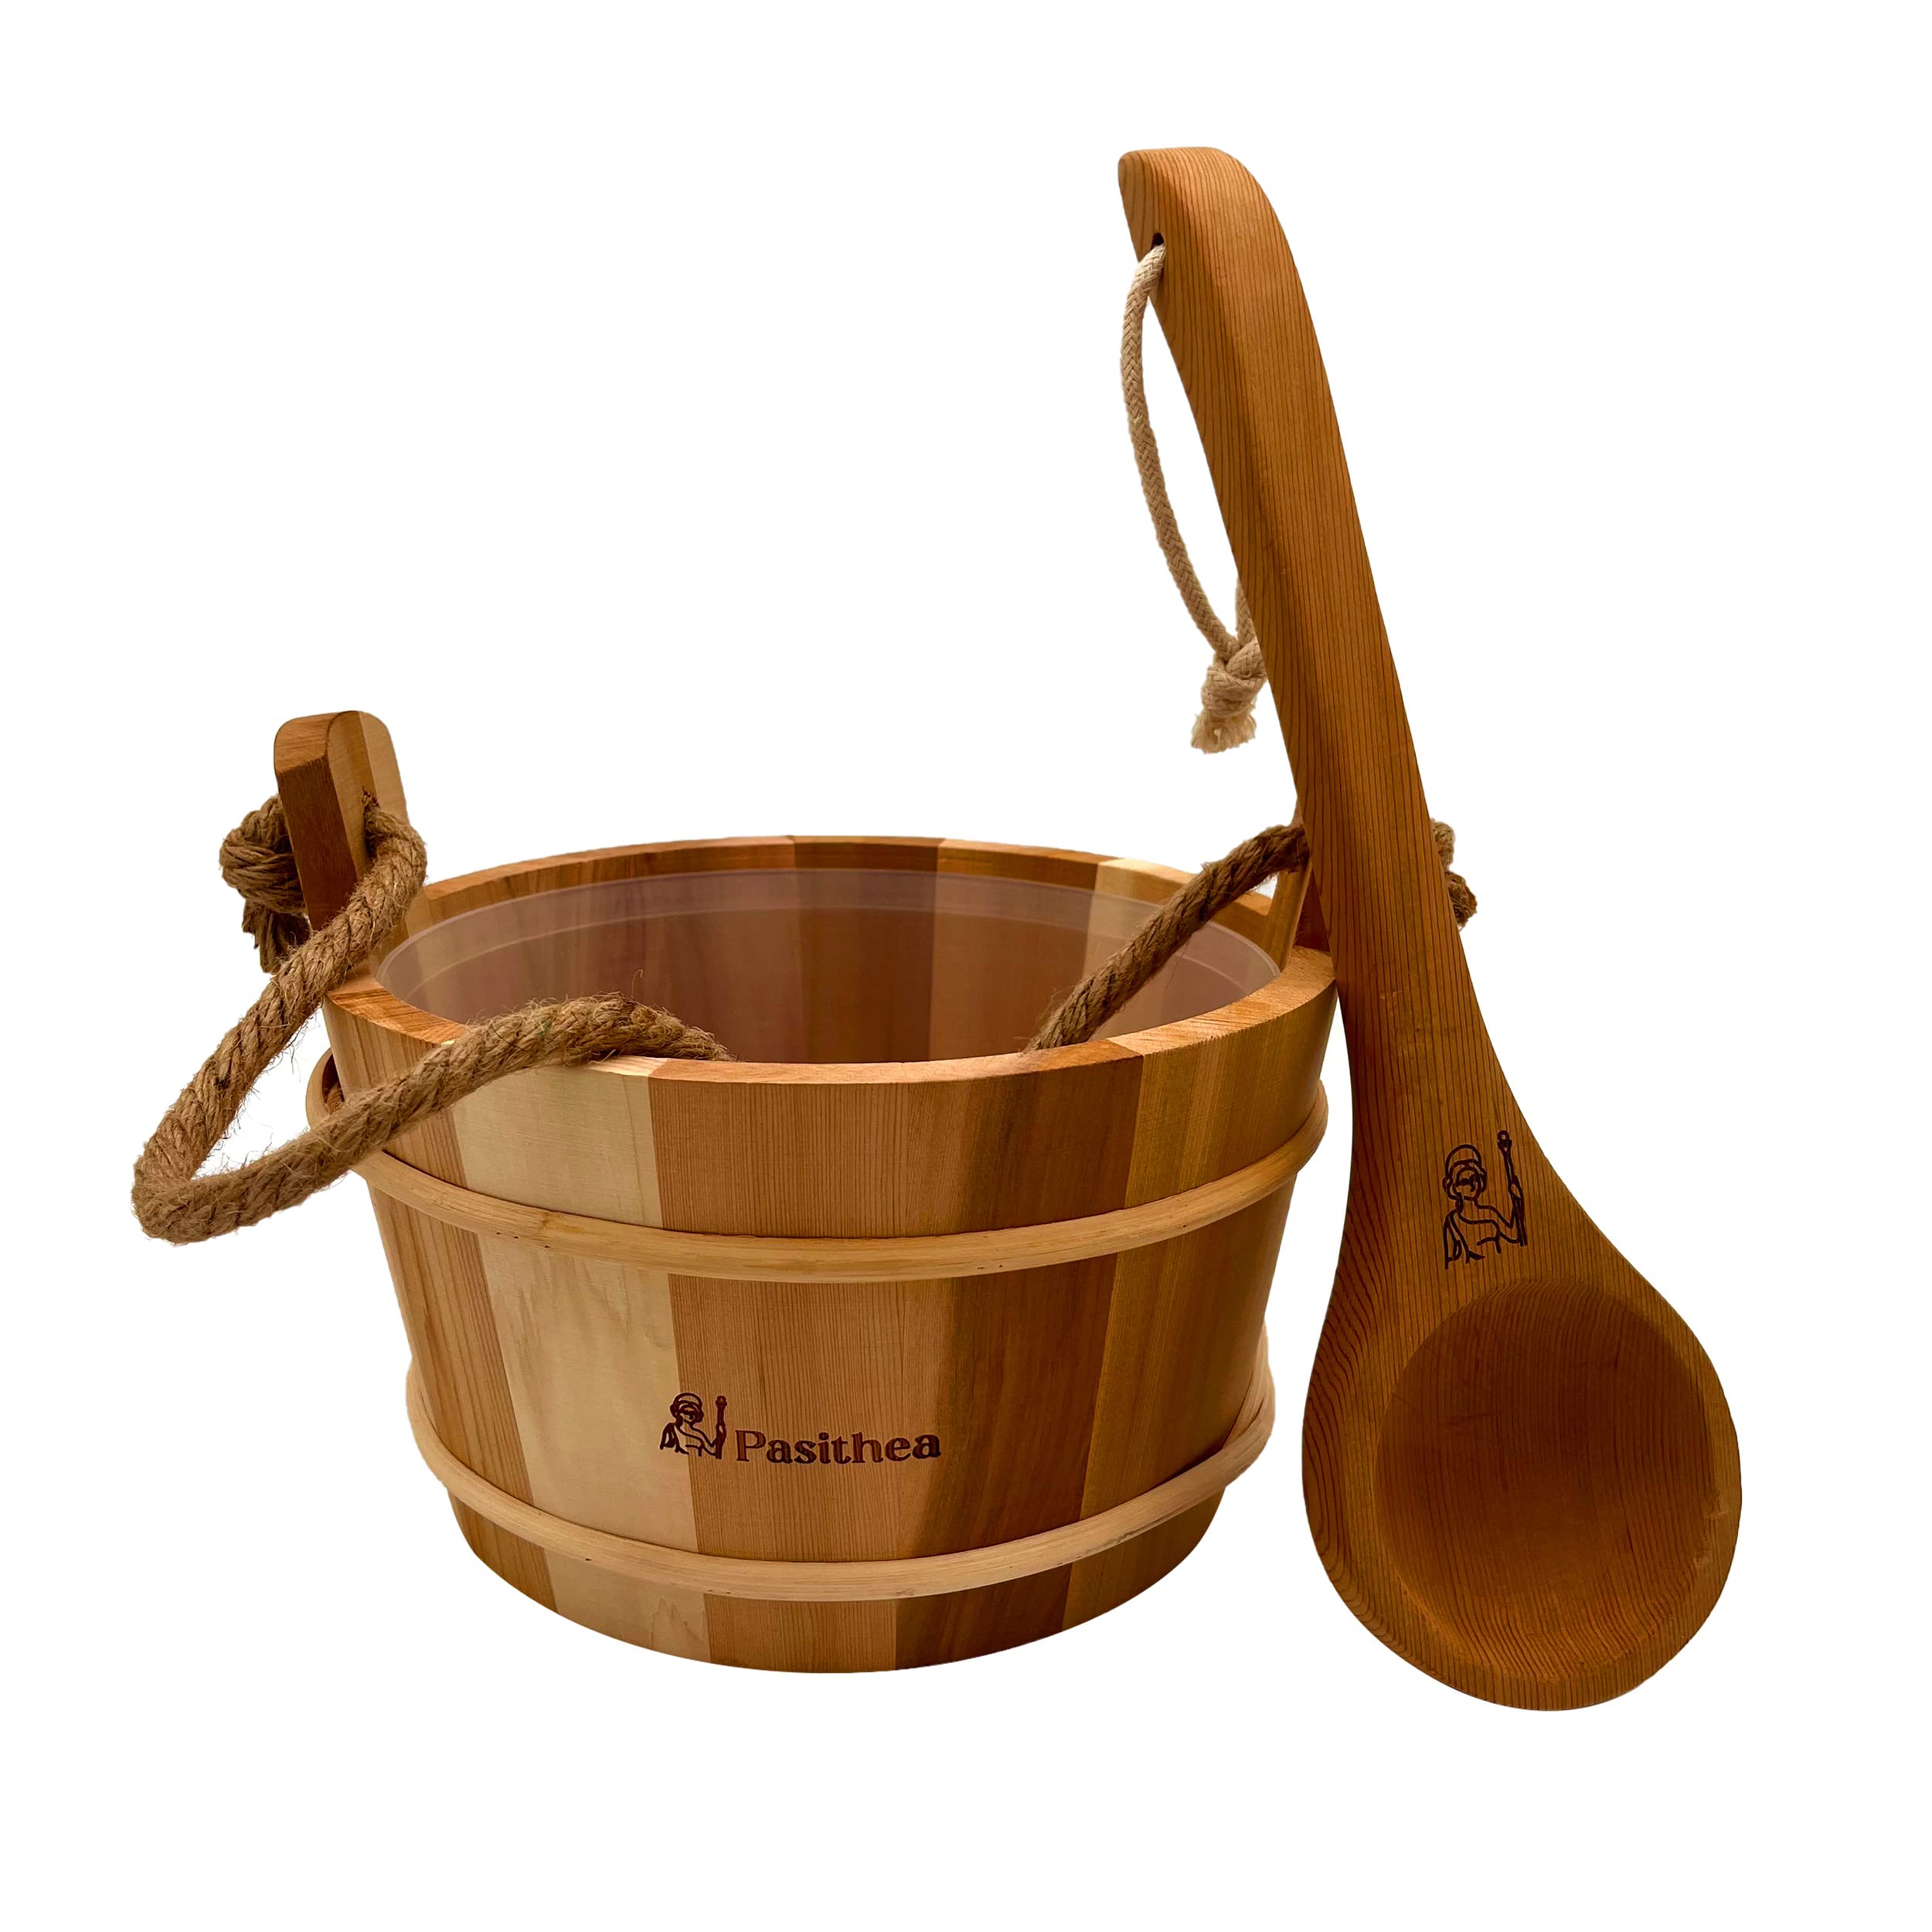 Pasithea Canadian Red Cedar Sauna Bucket and Ladle with Wooden Bottom - Handmade, 1 Gallon (4L) Plastic Liner, and Natural Rope Handle - Premium Sauna Accessories Kit with Sauna Ladle and Bucket